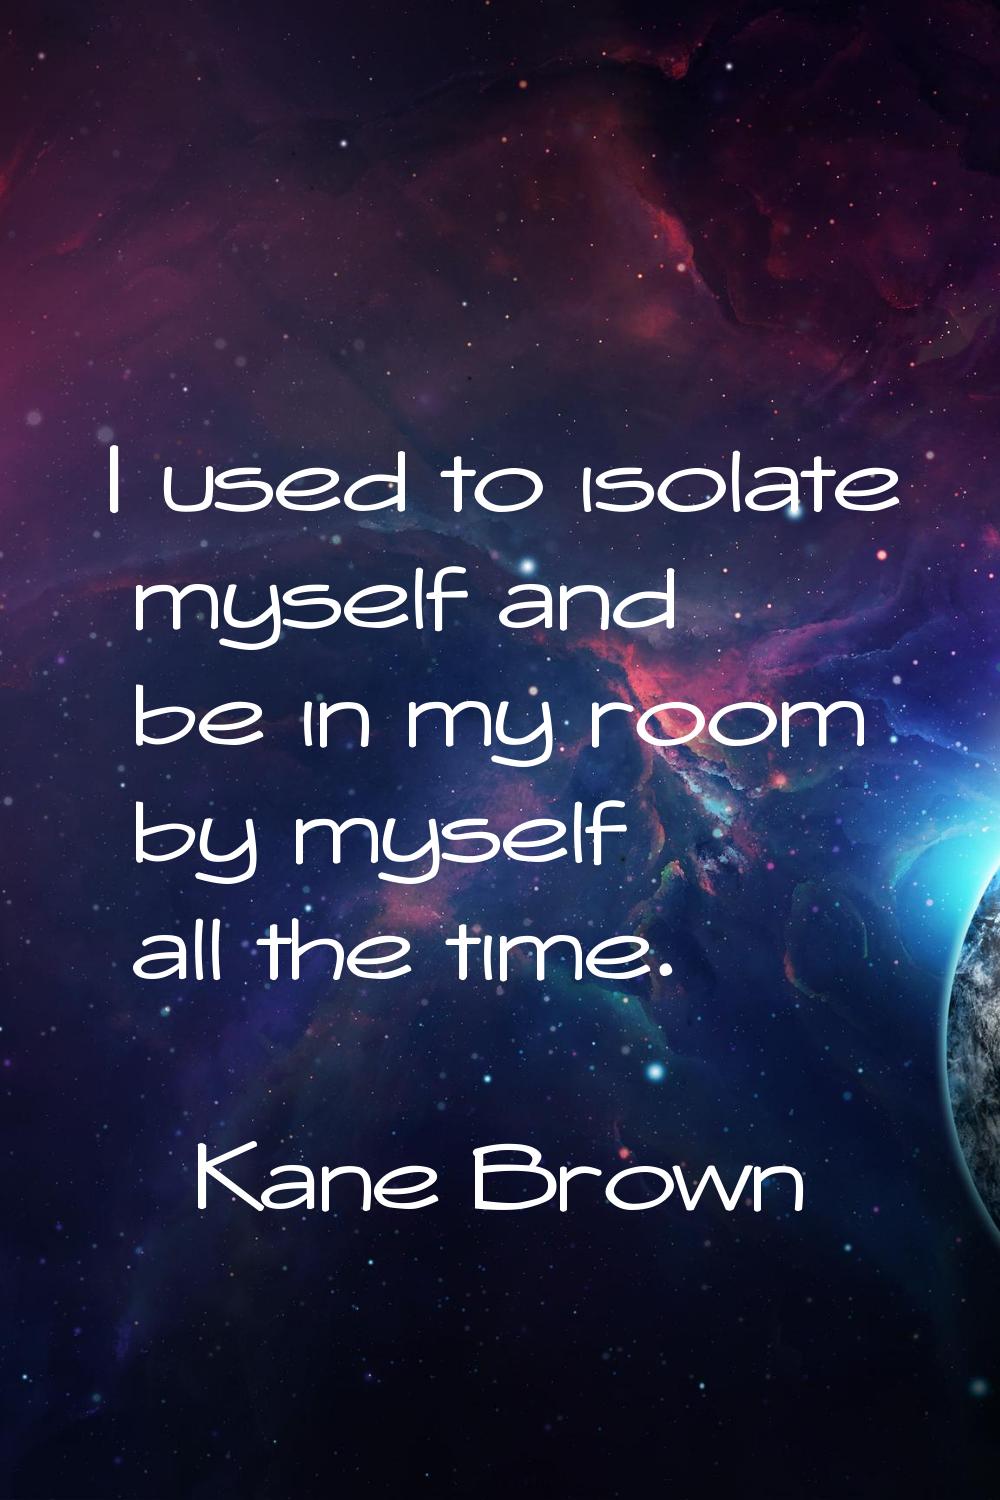 I used to isolate myself and be in my room by myself all the time.